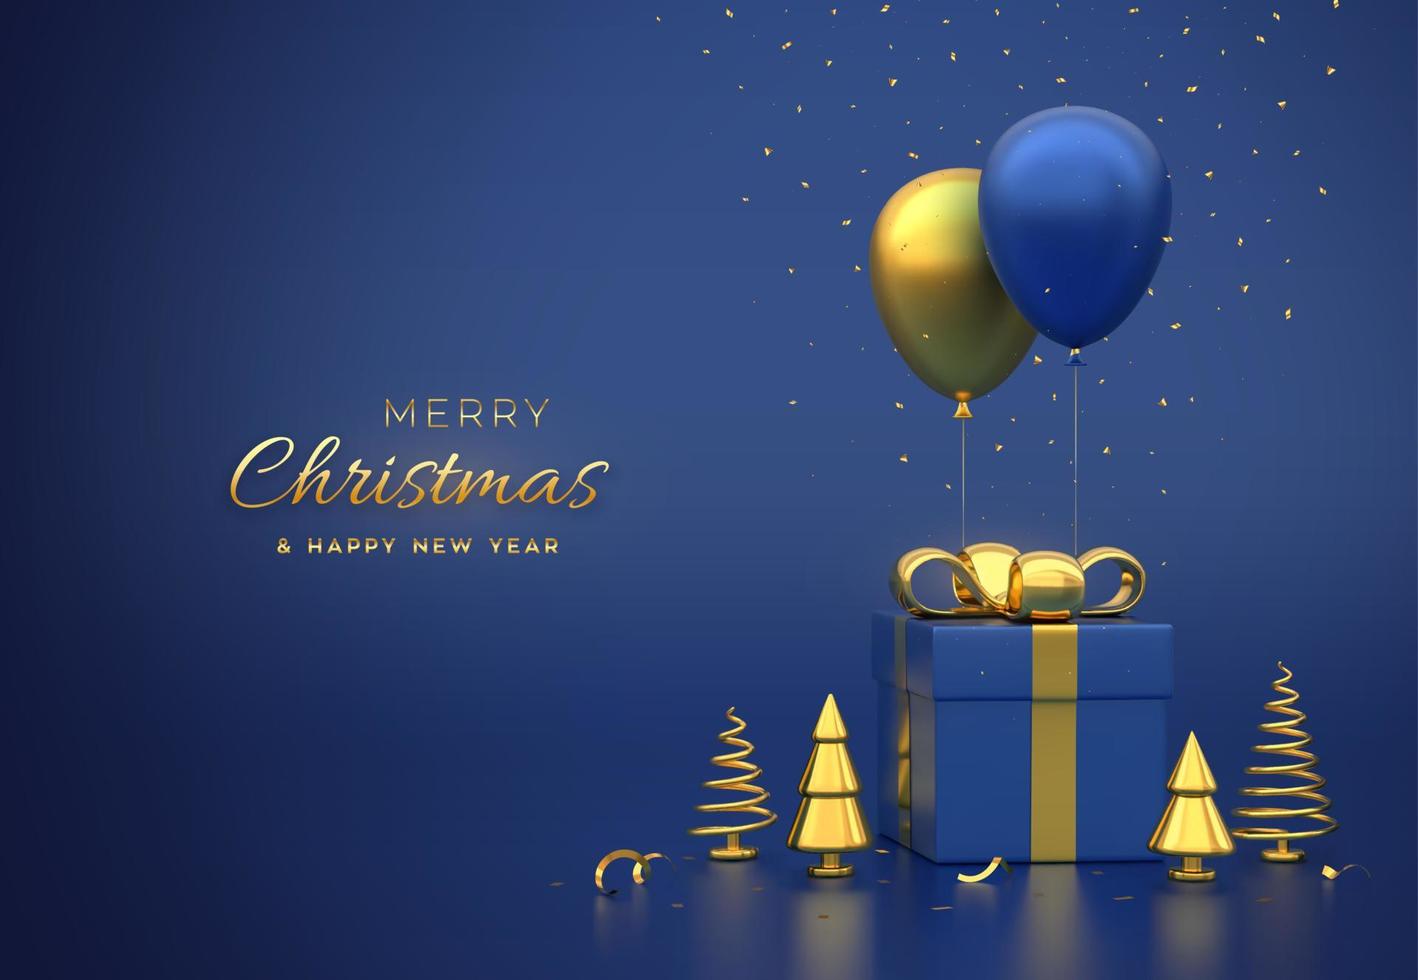 Gift box with gold bow and golden metallic pine or fir cone shape spruce trees, festive helium balloons and falling confetti on blue background. Merry christmas card or banner. Vector illustration.